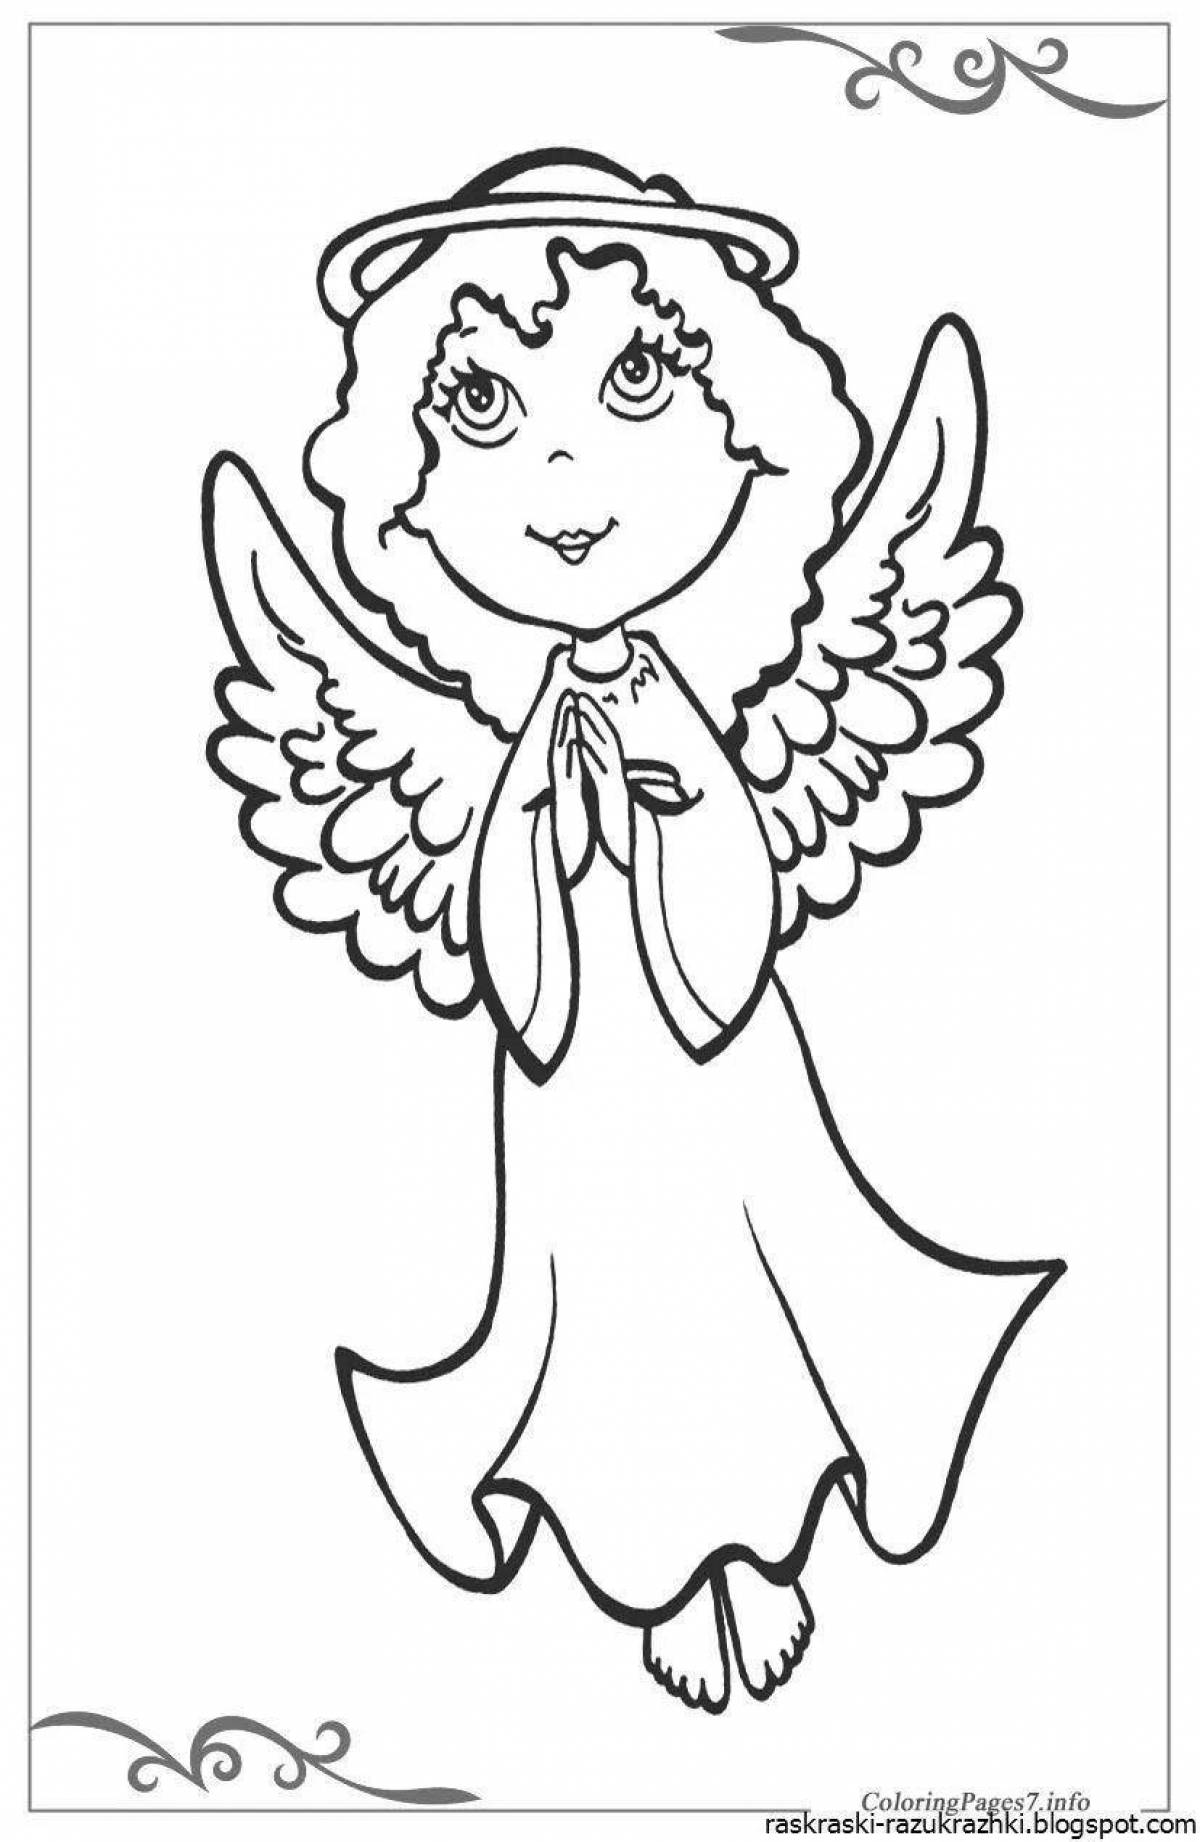 Exquisite angel face coloring book